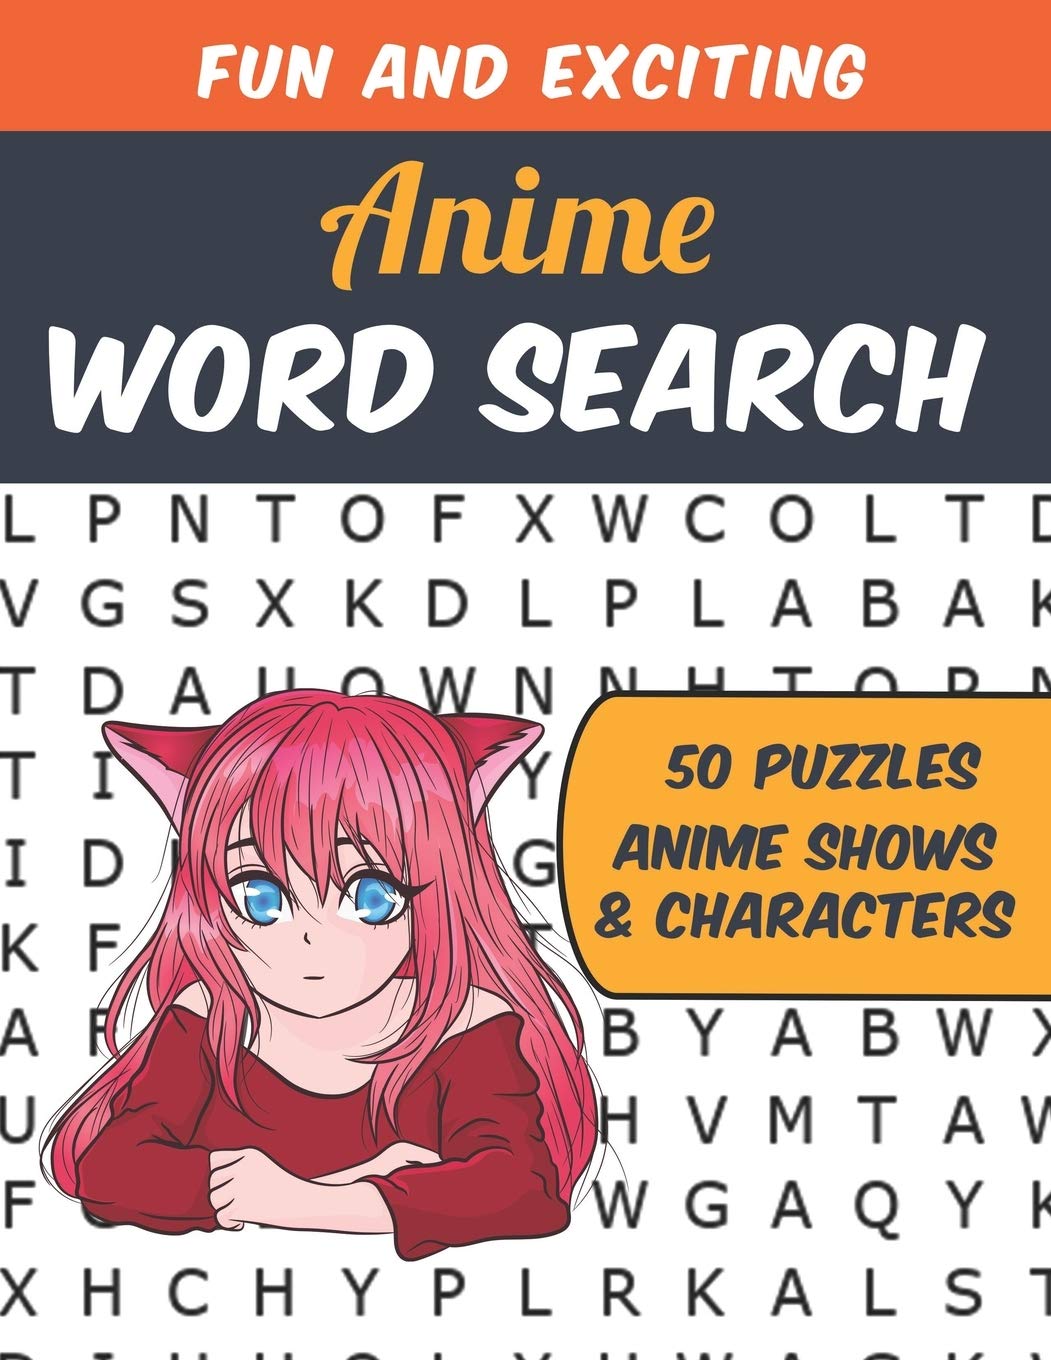 How to write the word 'anime' in Japanese - Quora